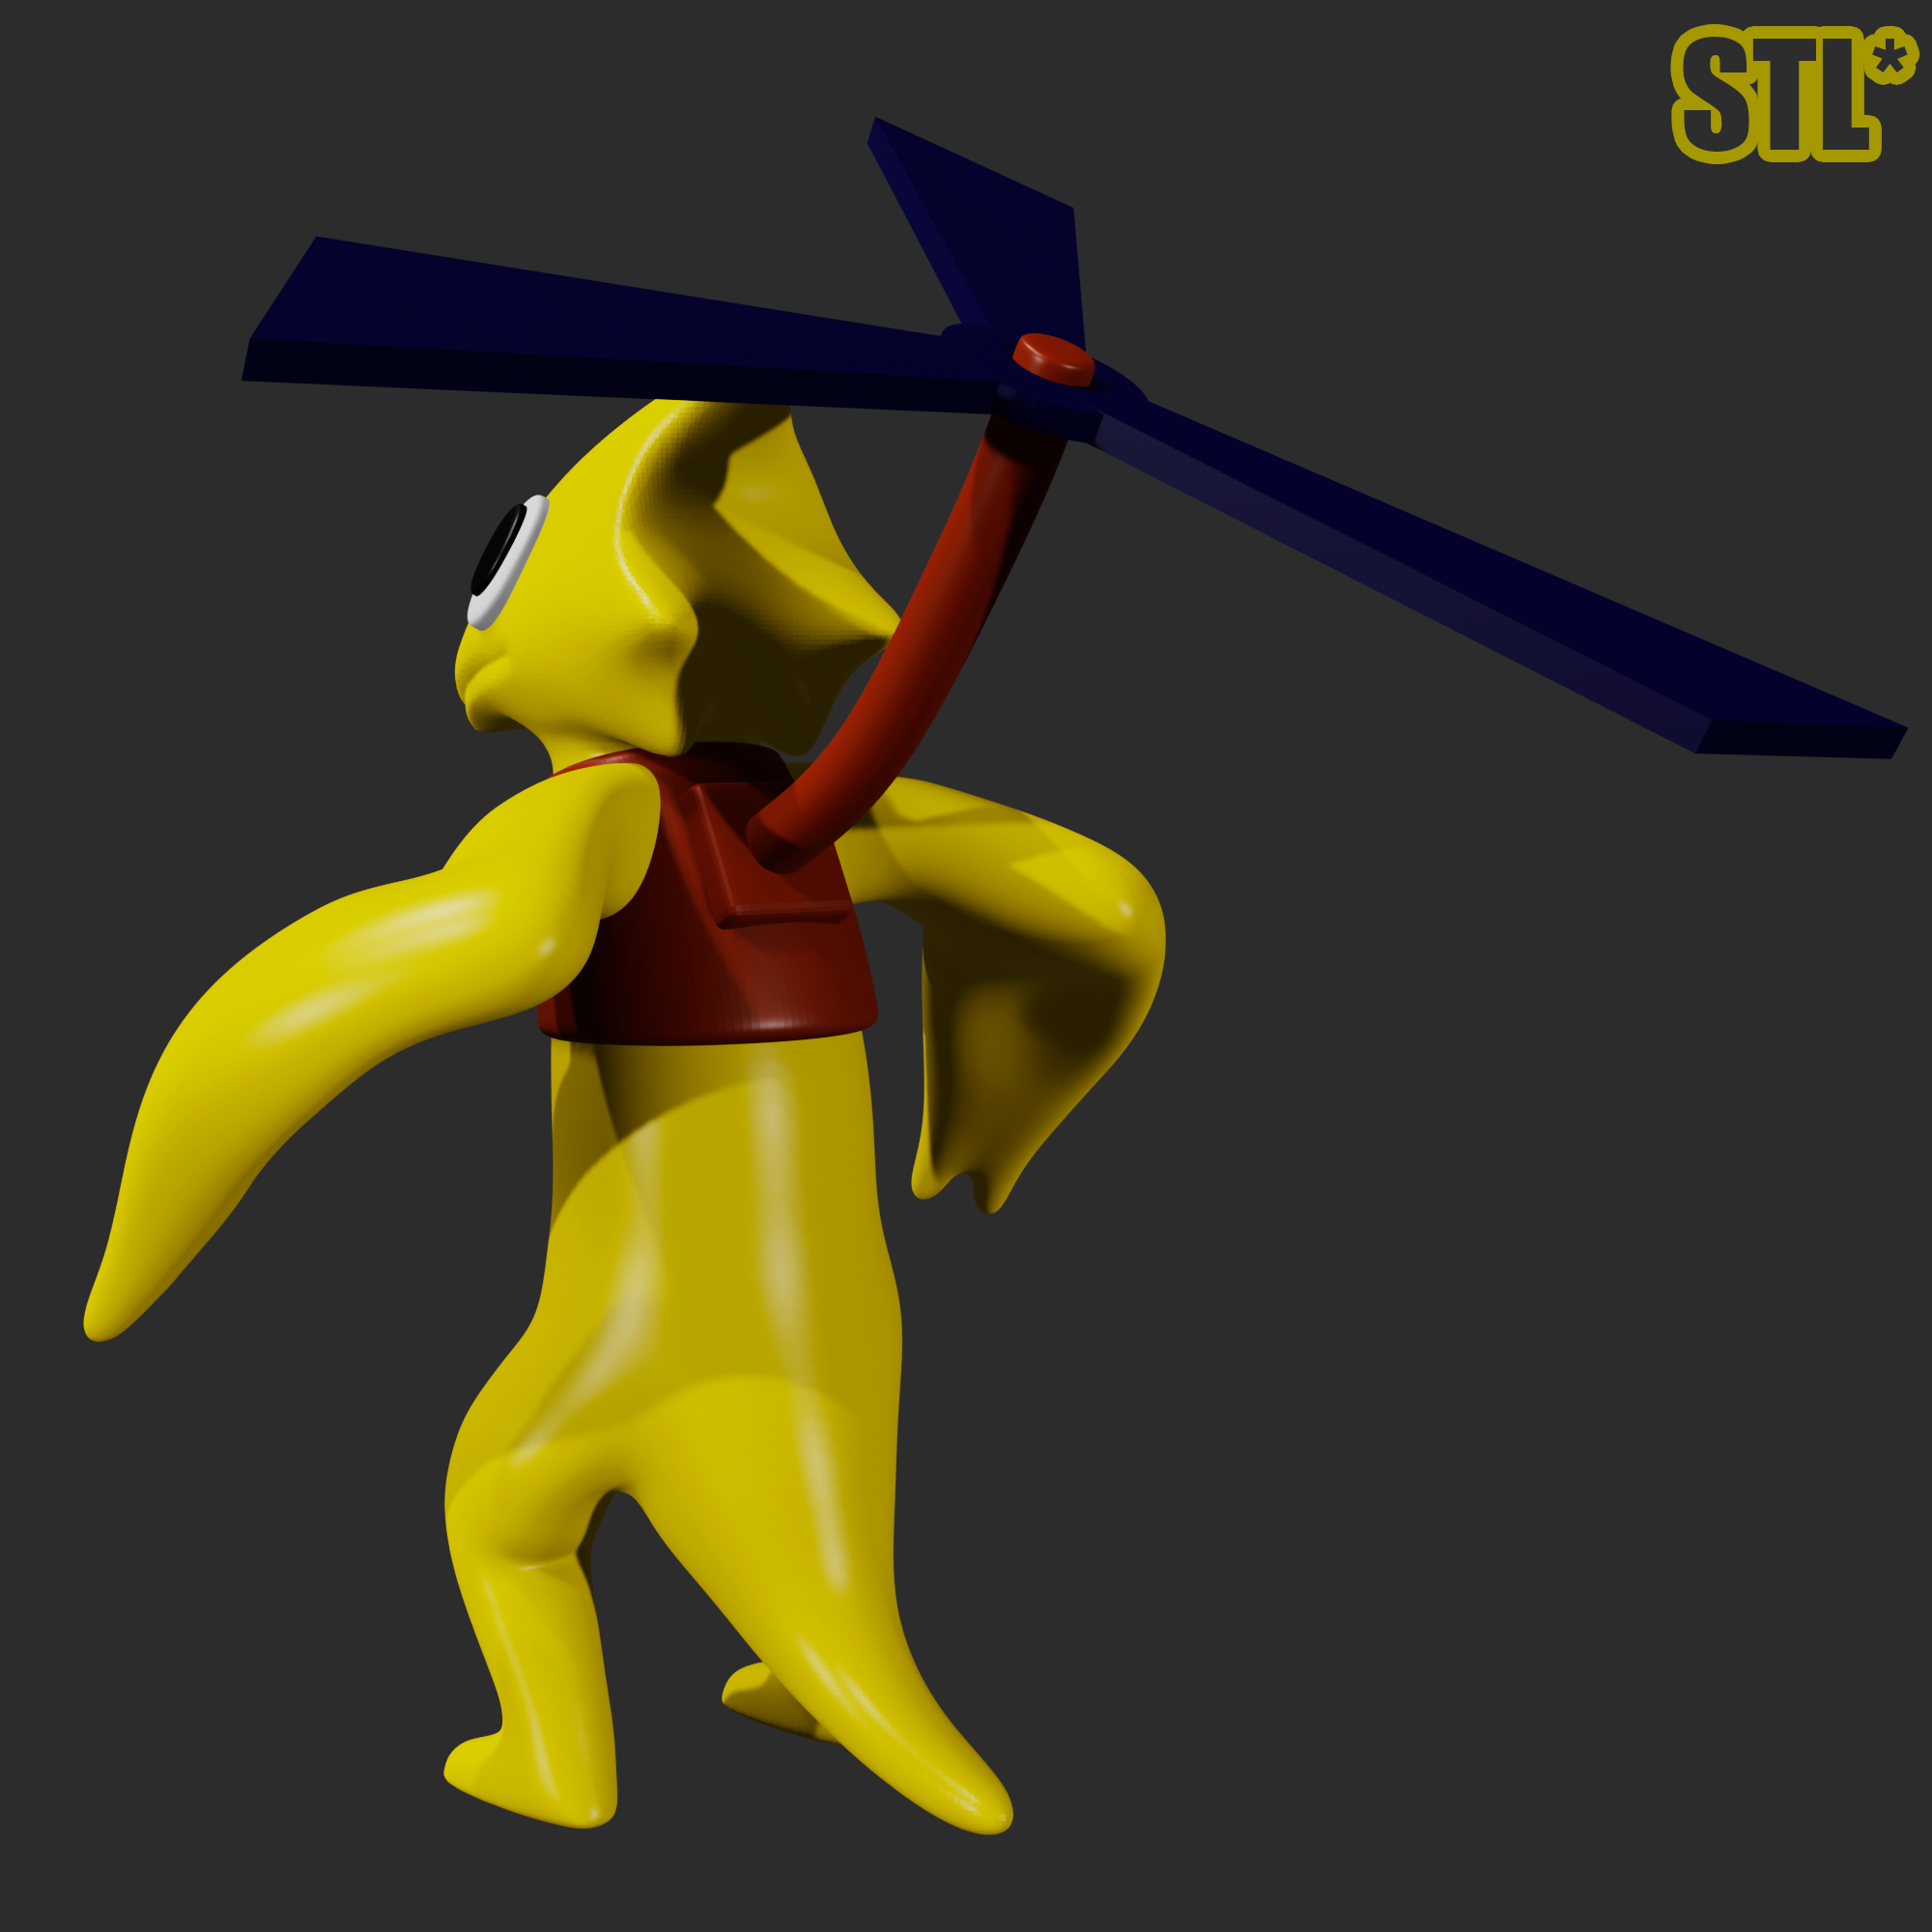 STL file RED FROM ROBLOX RAINBOW FRIENDS